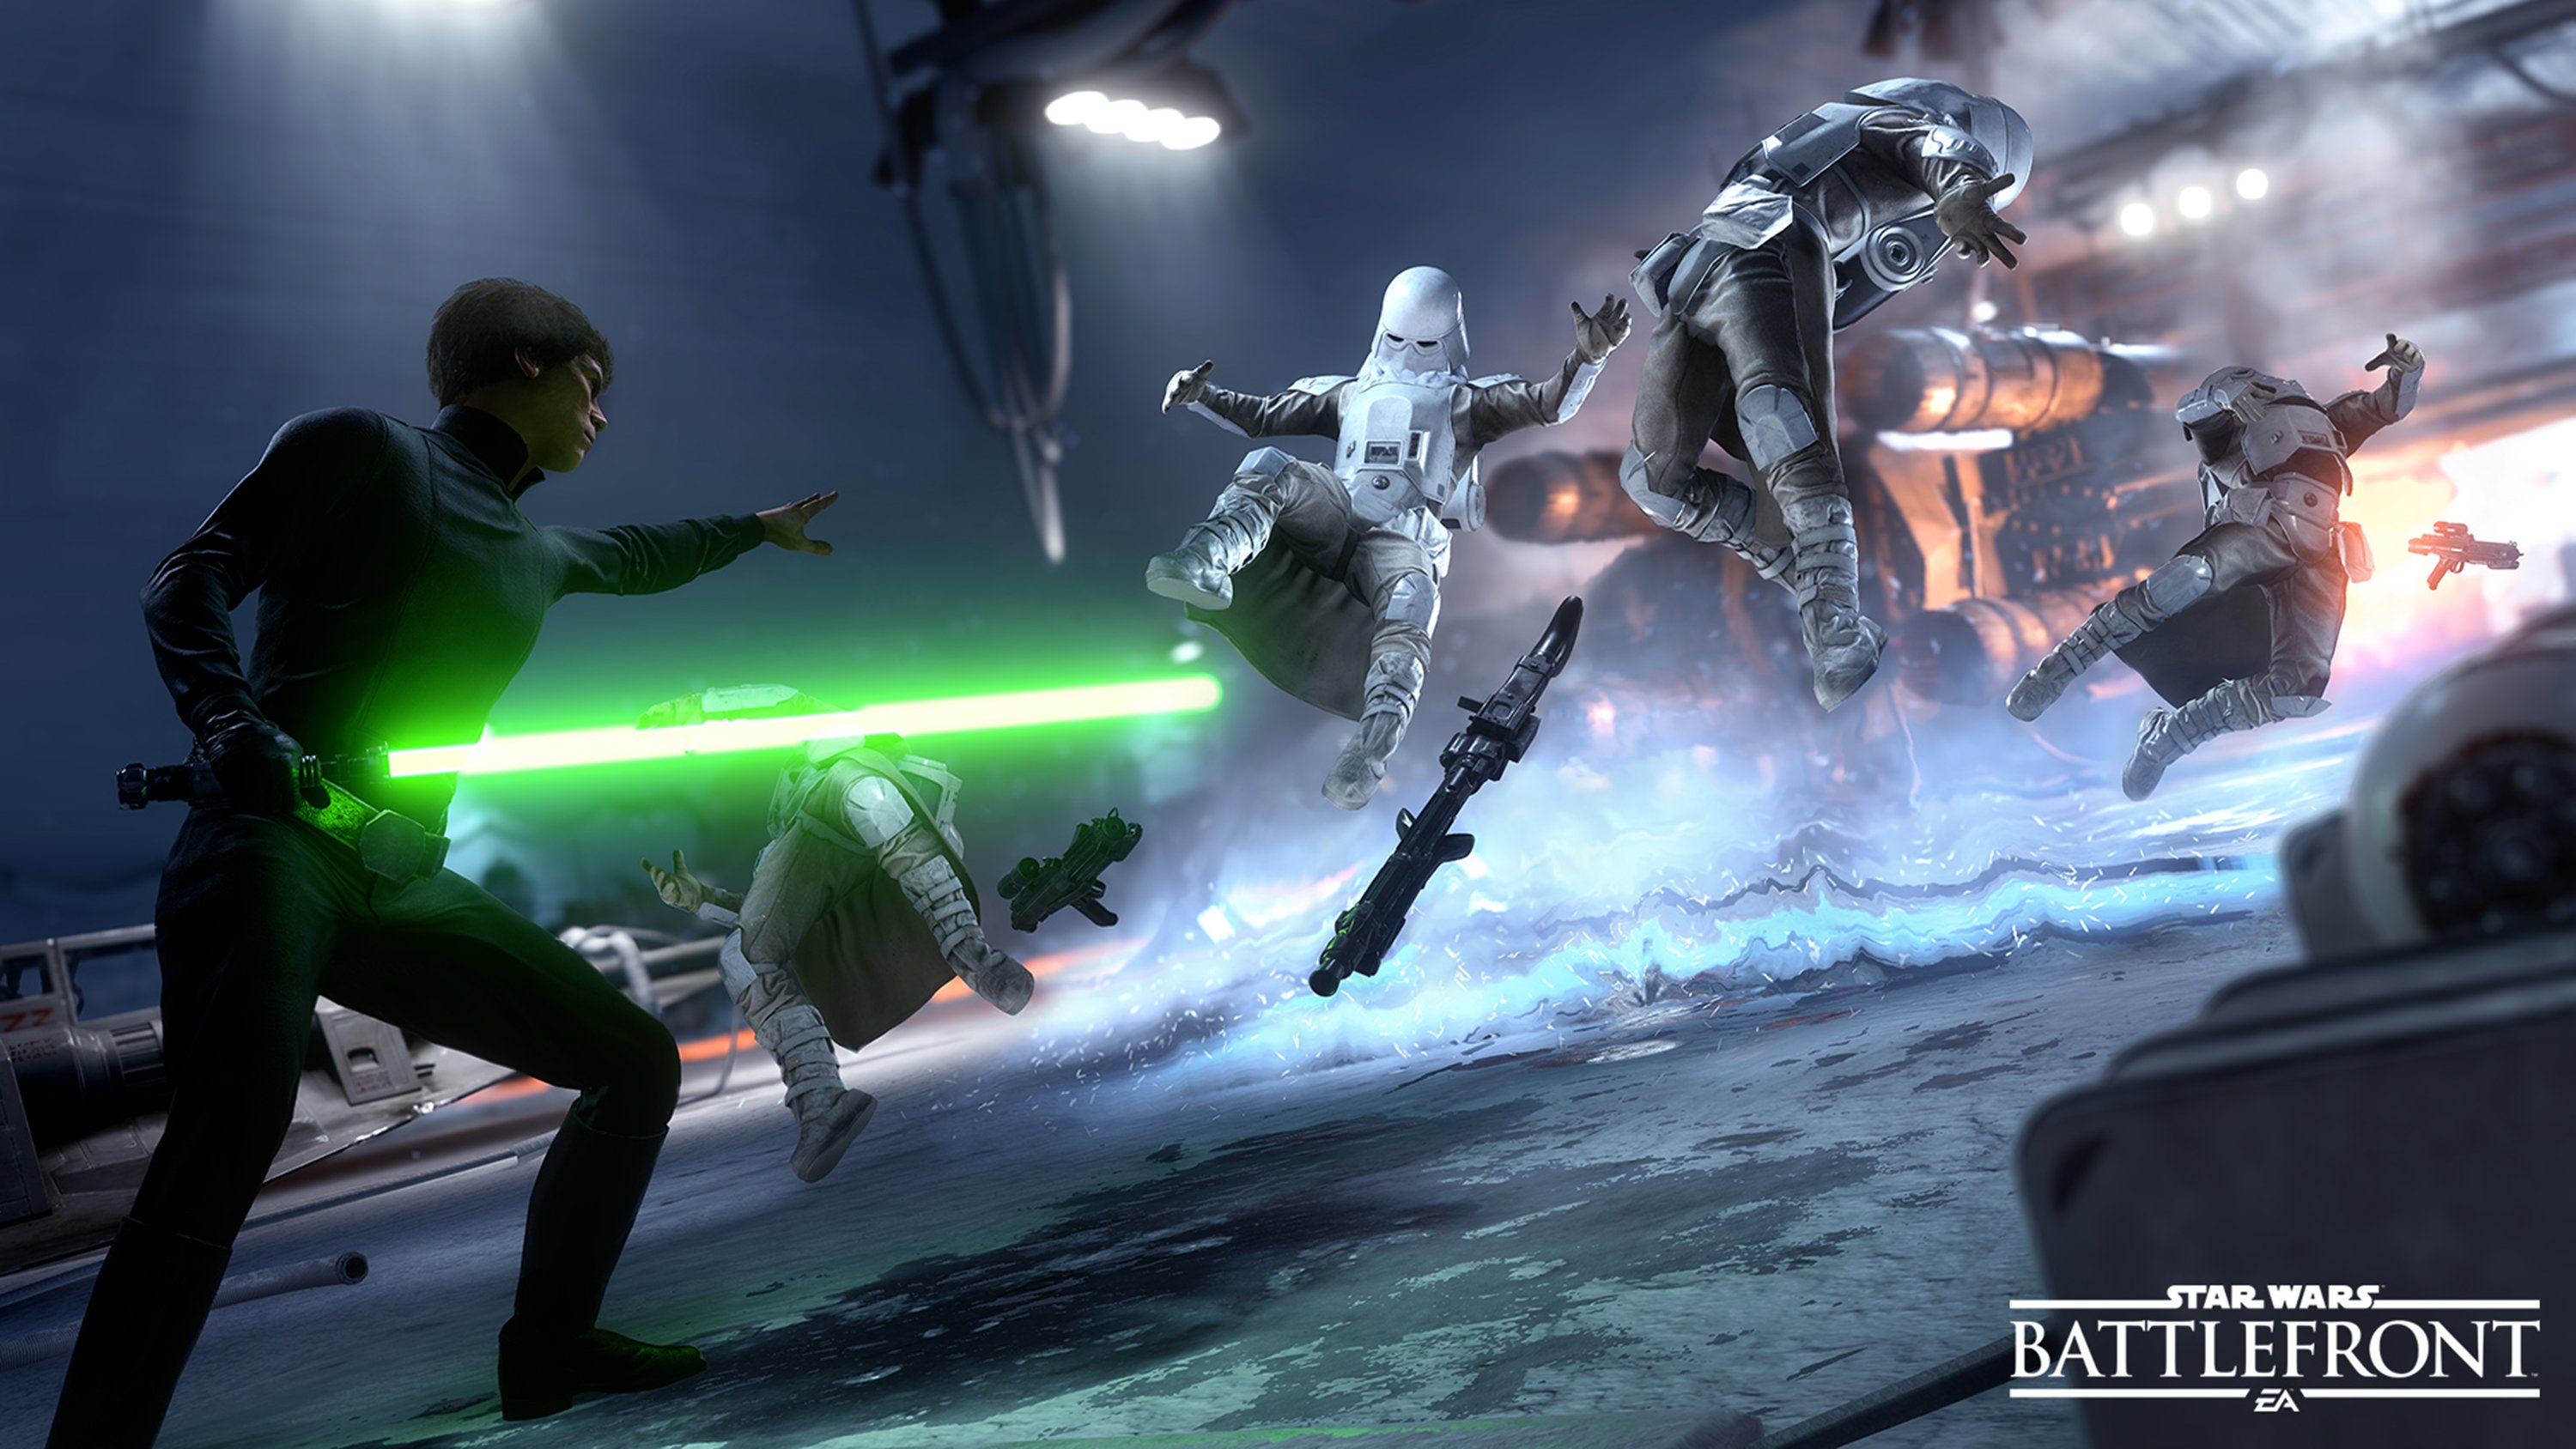 how to get star wars battlefront 1 free